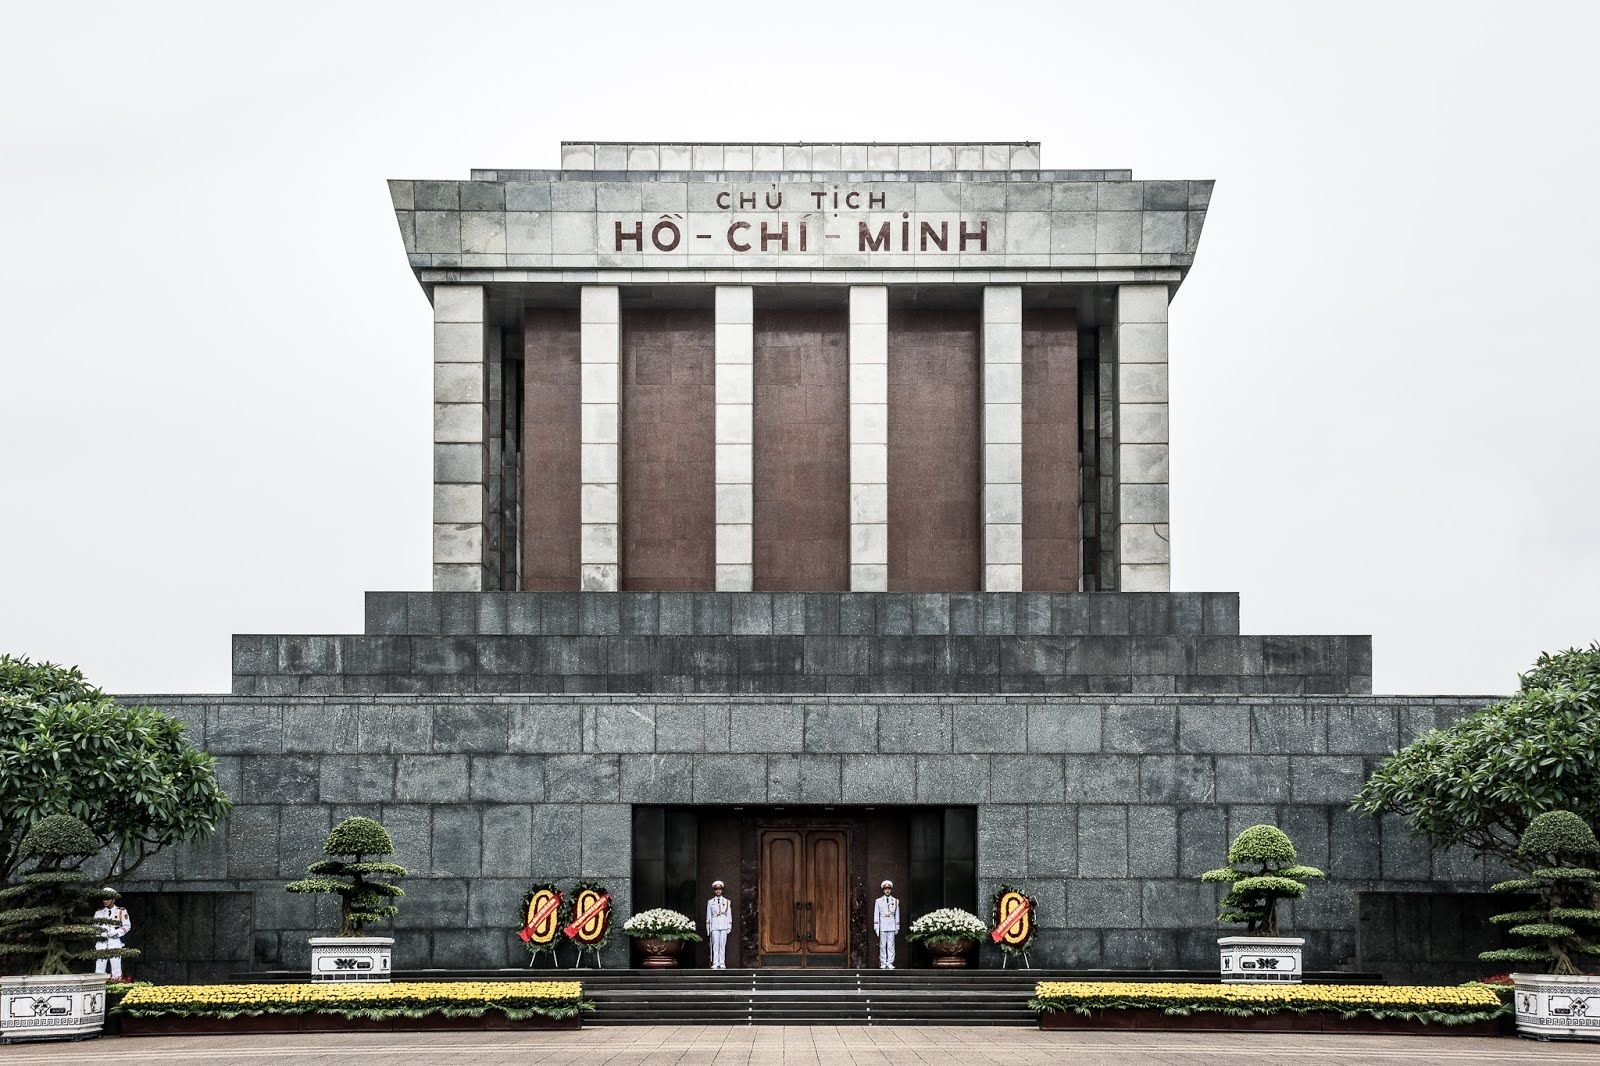 The mummy of their first president Ho Chi Minh was embalmed & display in a mausoleum.